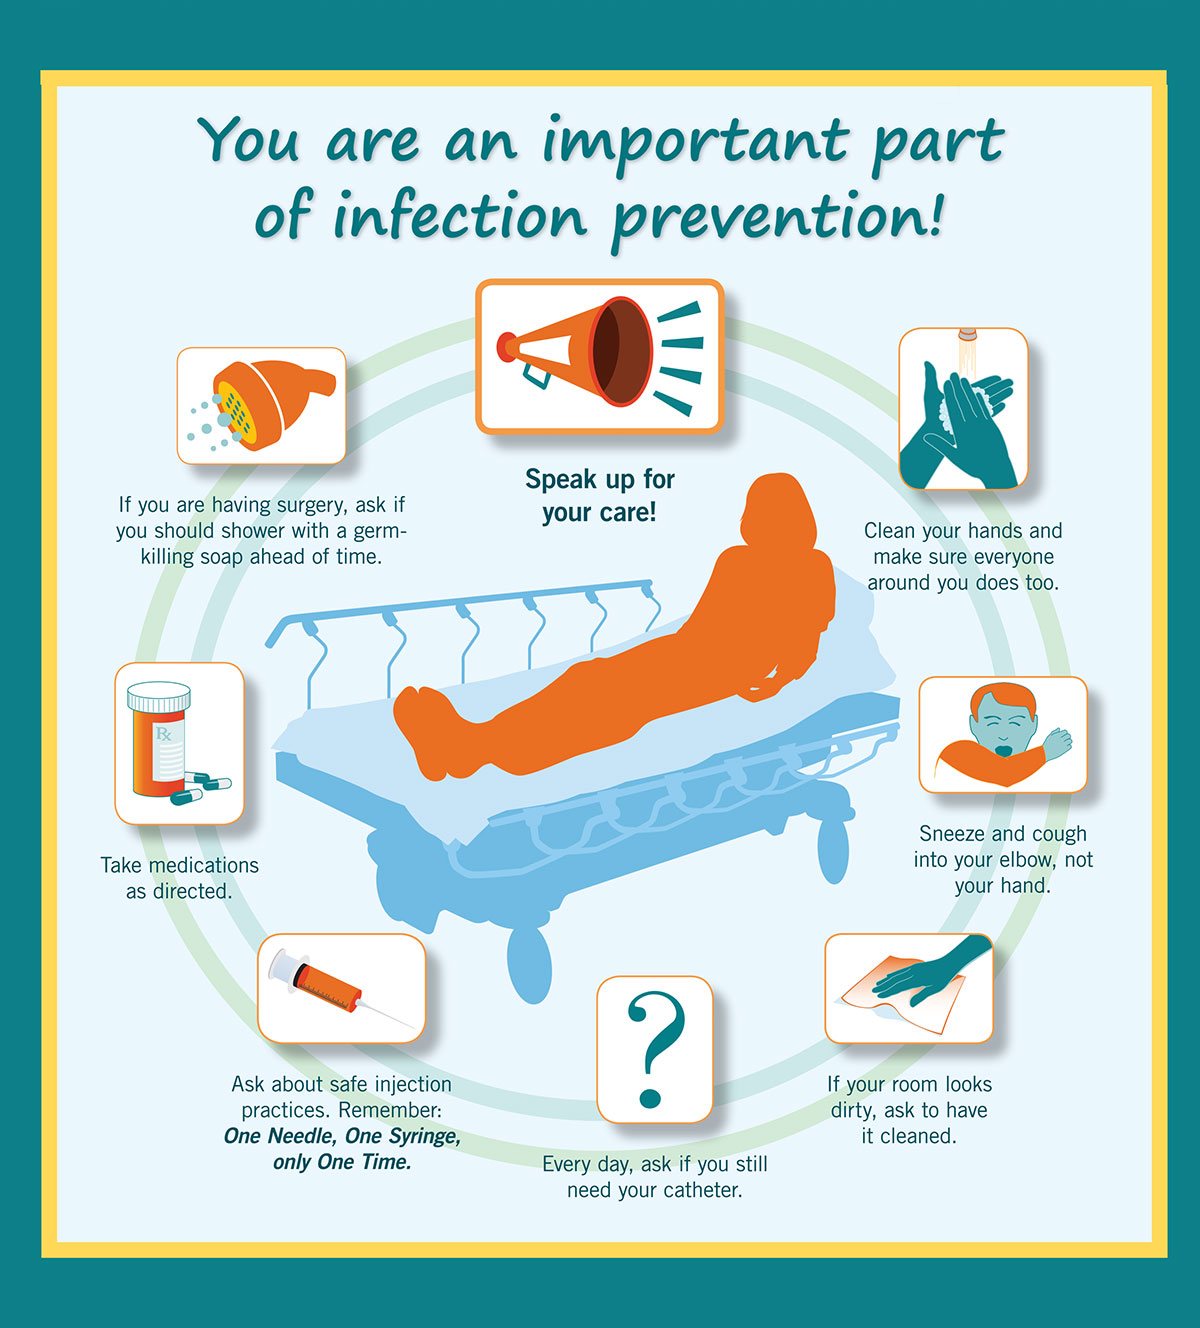 You are an important part of infection prevention